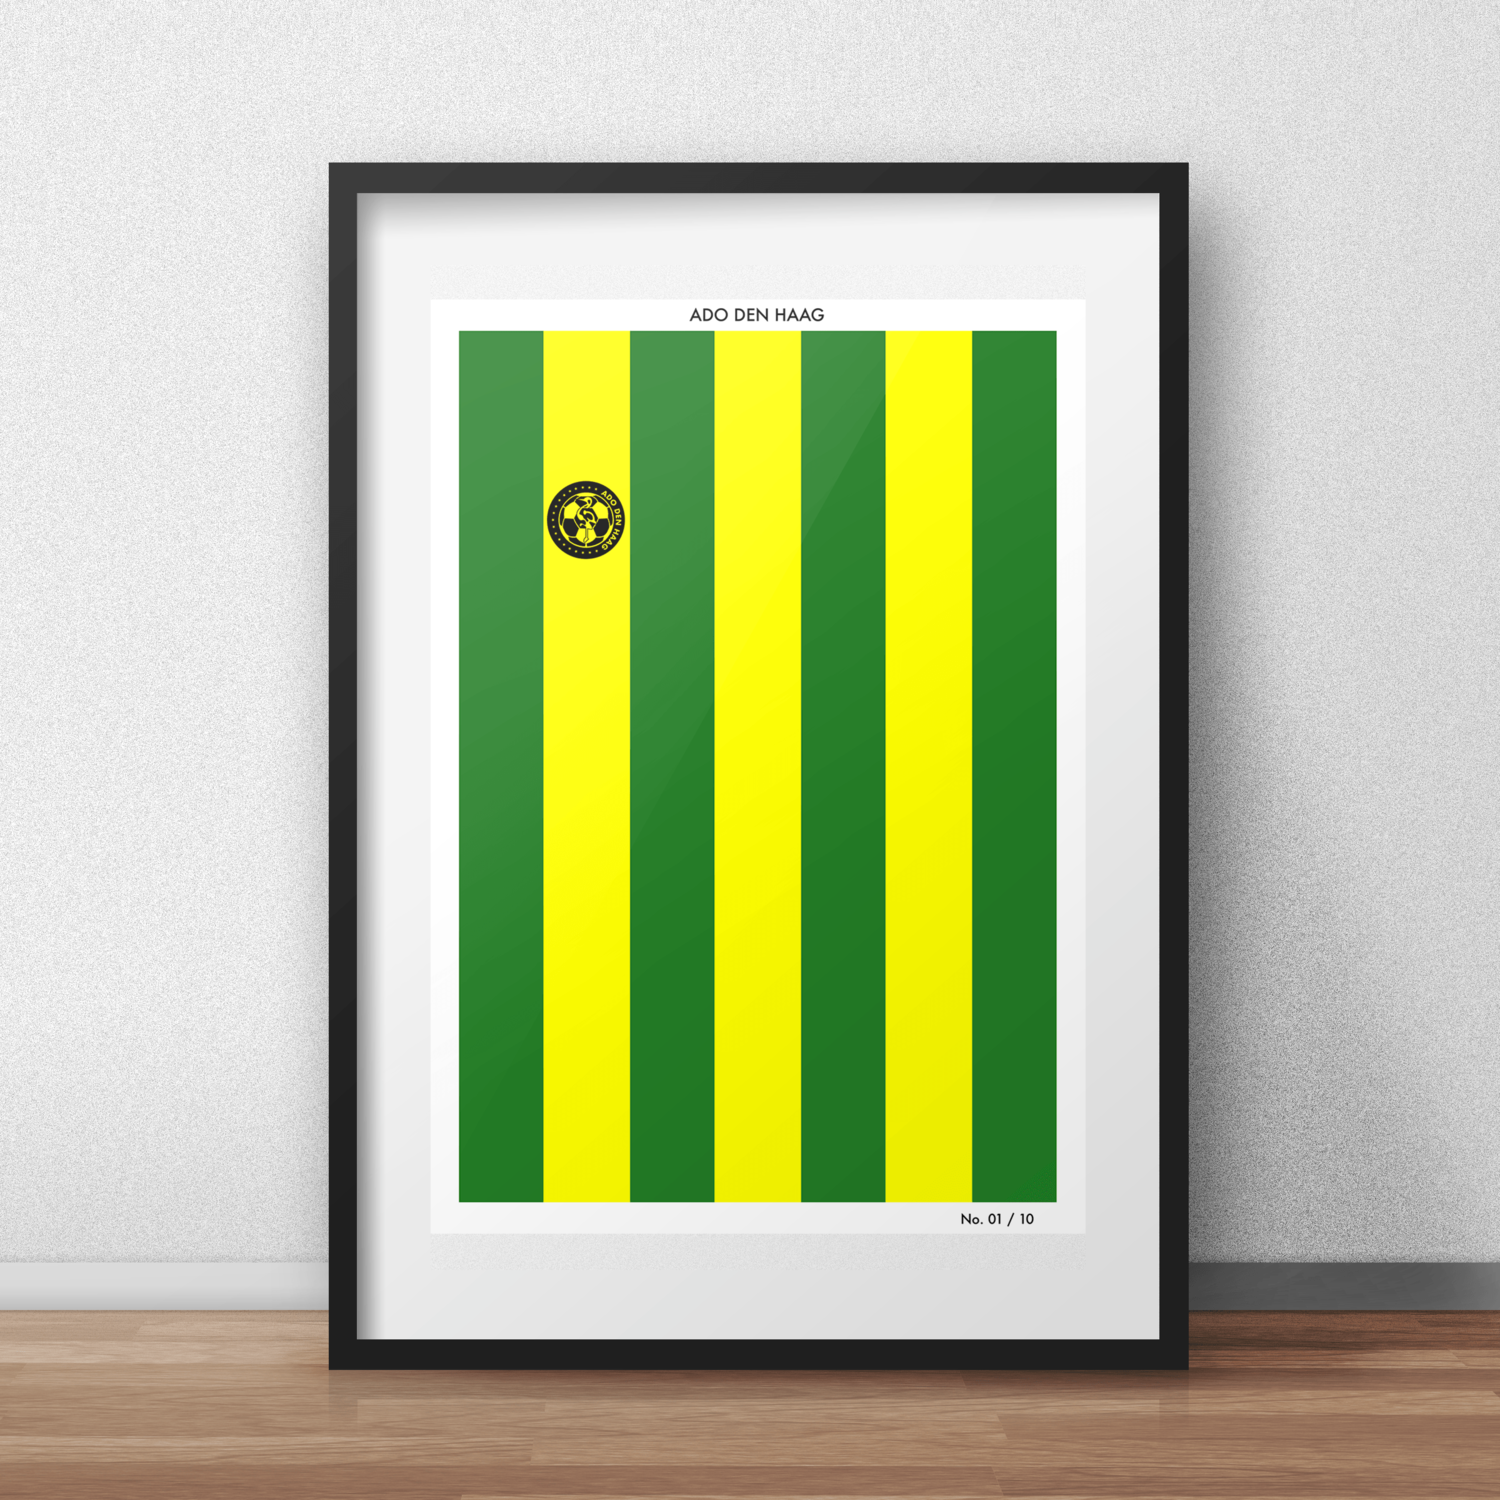 Landgoed Golven drie ADO Football Shirt Prints & Posters — Nope - No Ordinary People Exist